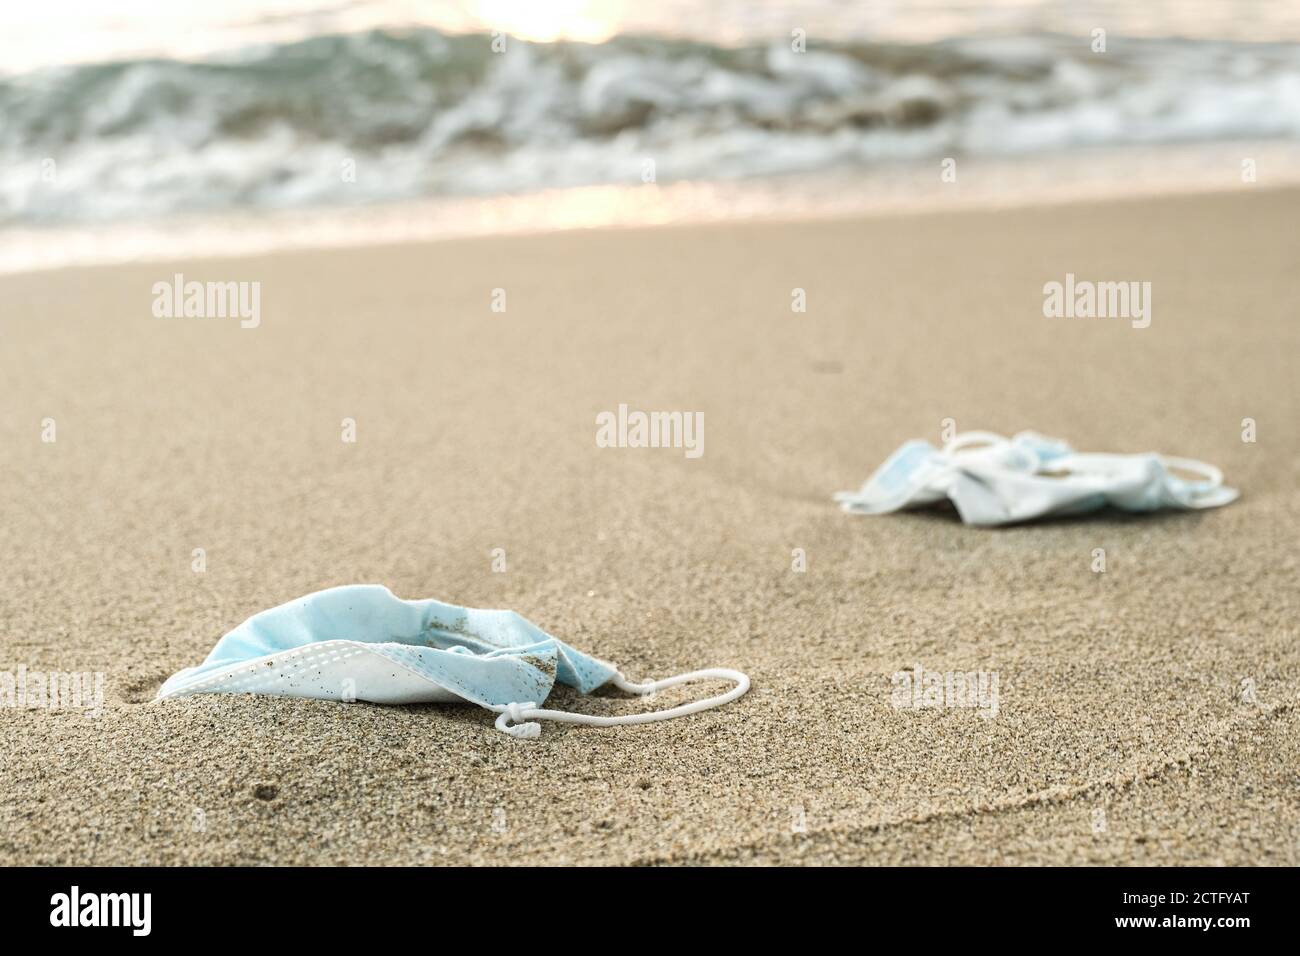 Medical face masks discarded on sea shore,covid19 pandemic disease pollution Stock Photo